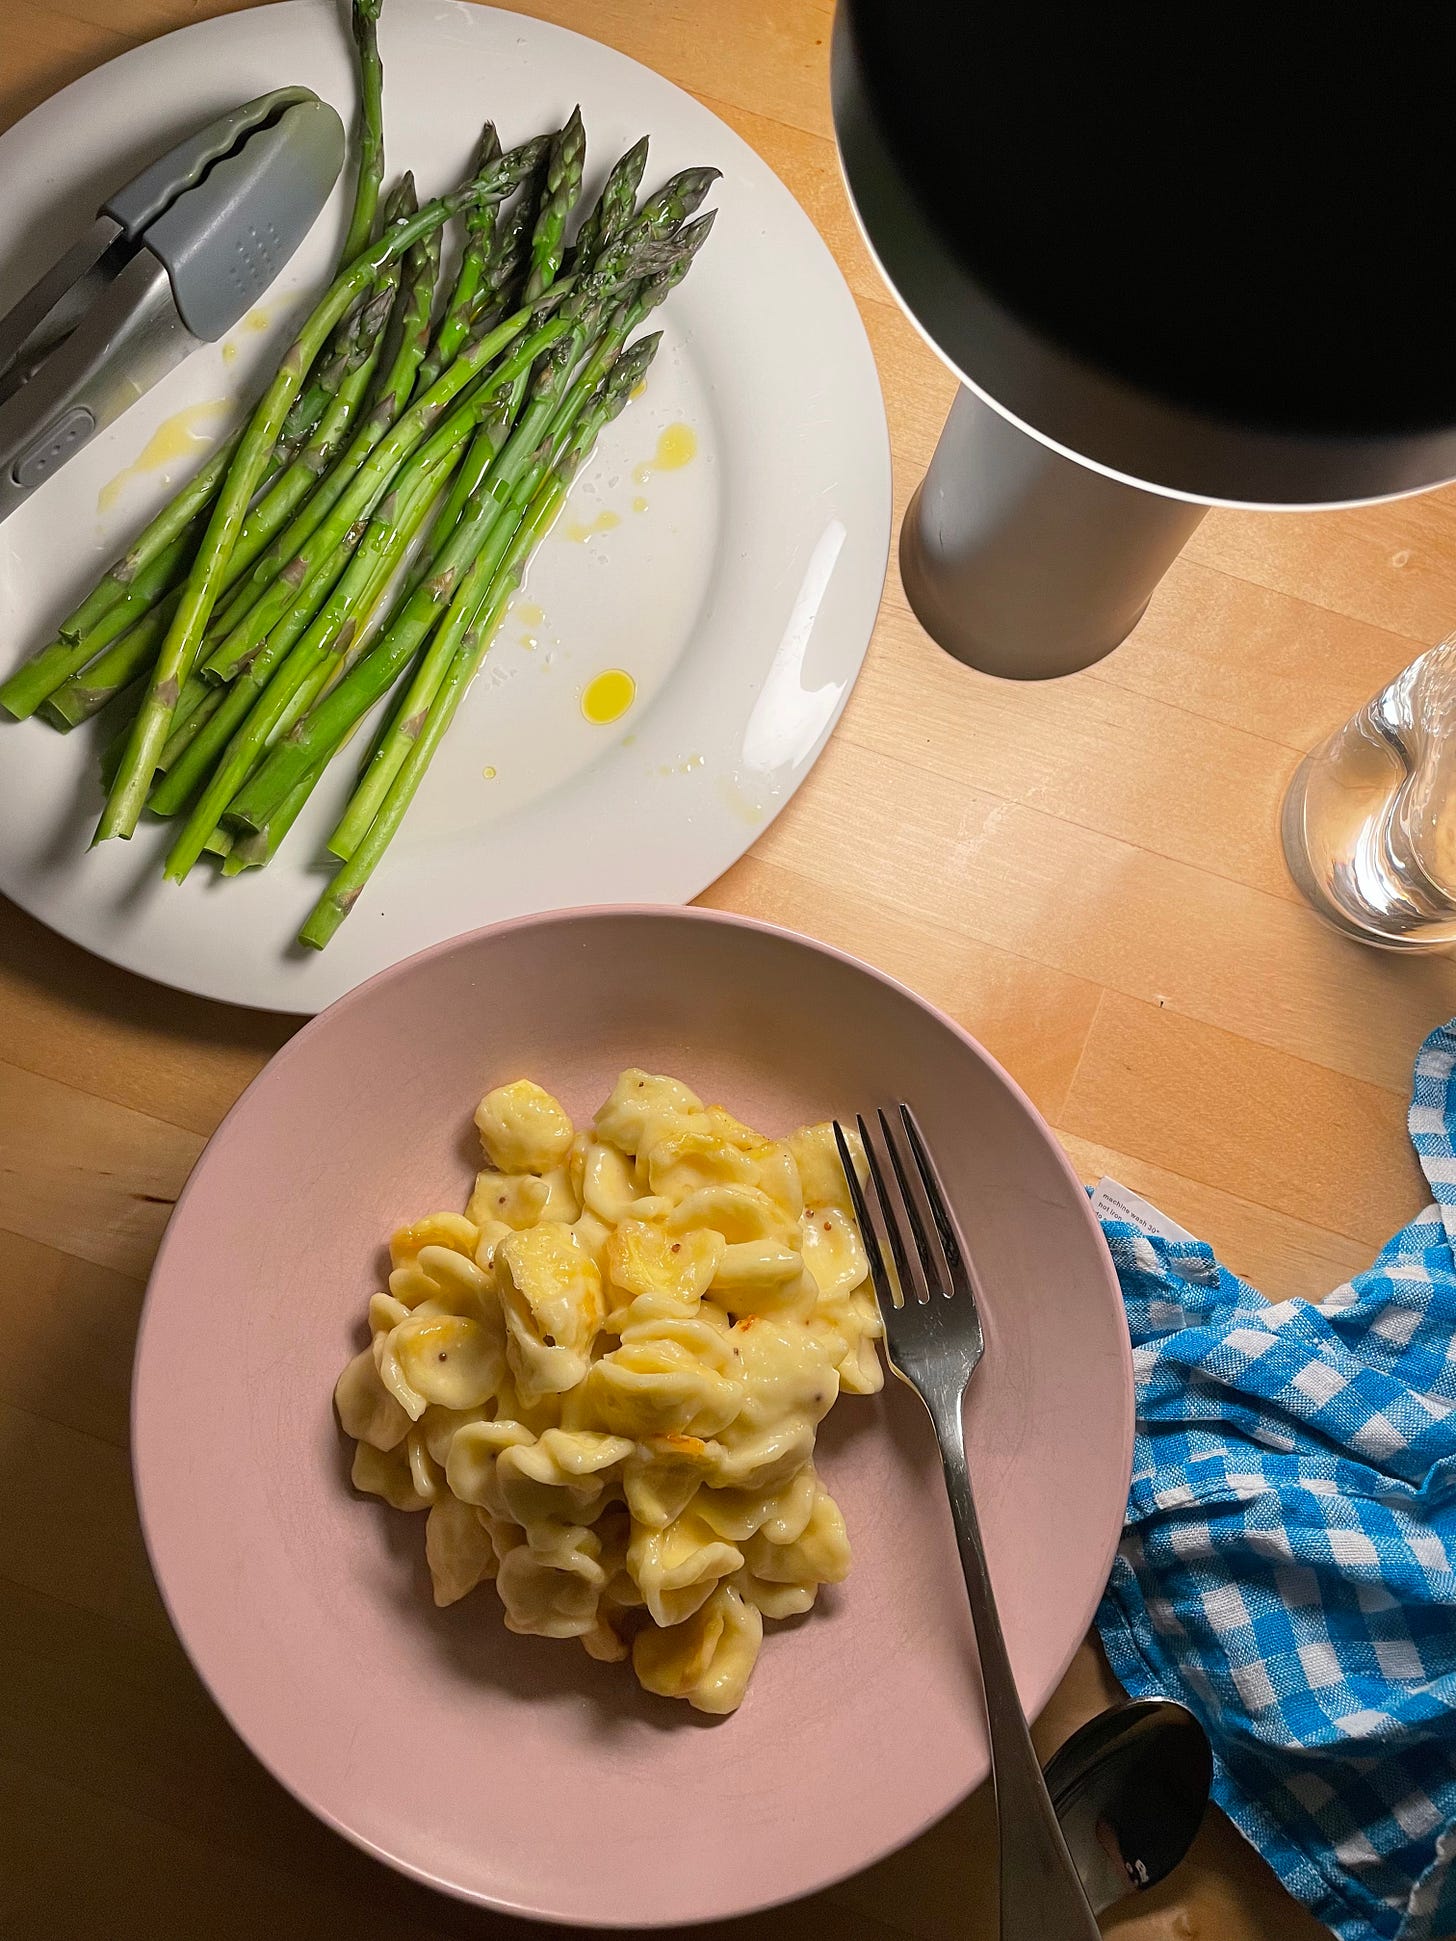 Bowl of orecchiette pasta in a cheesy sauce, with a plate of steamed asparagus topped with olive oil alongside.